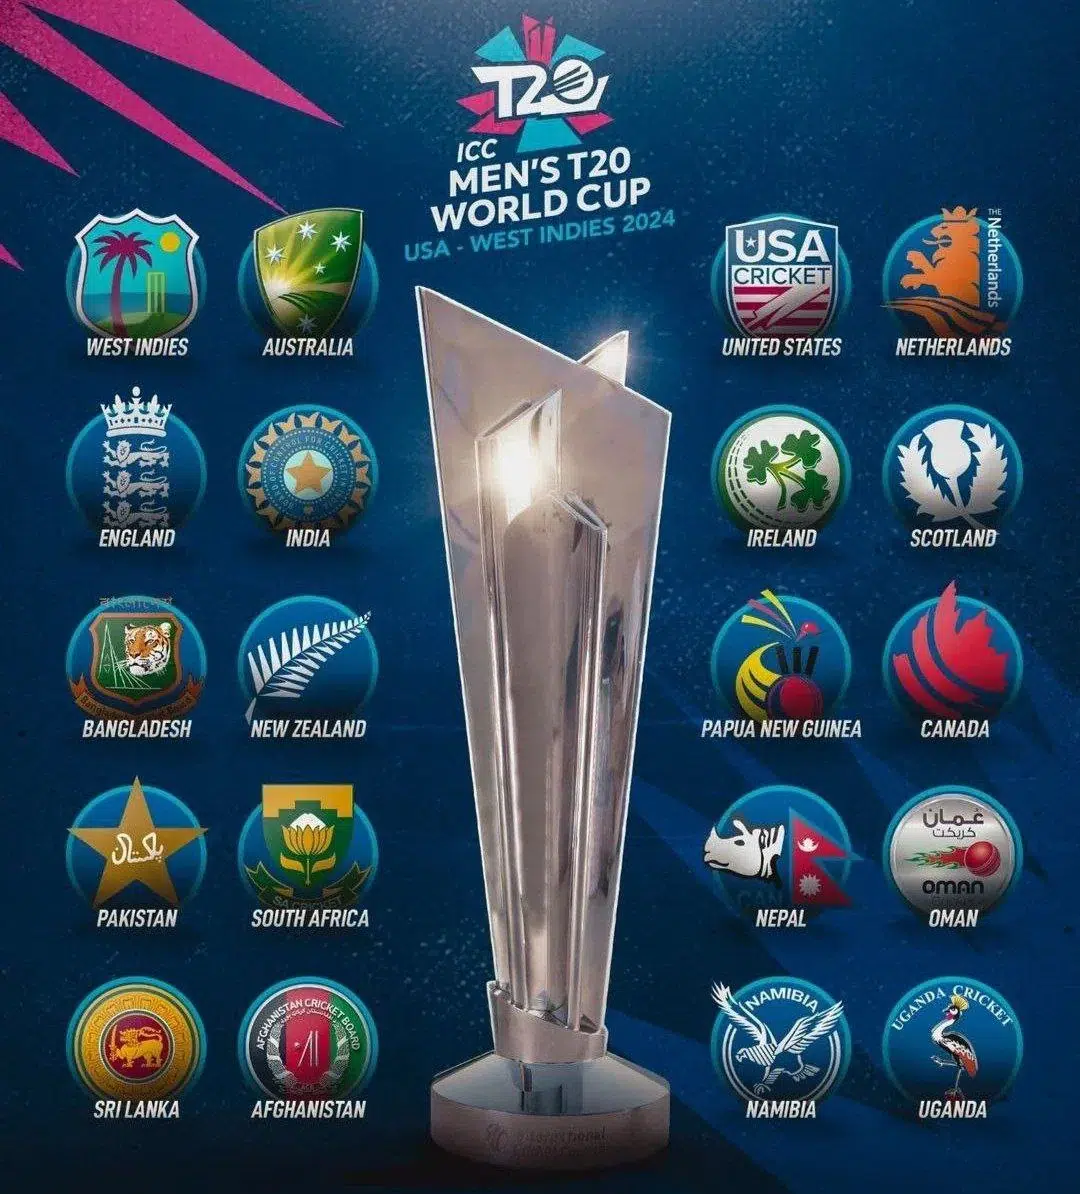 Qualified team for T20 World Cup 2024 Psl Janoon